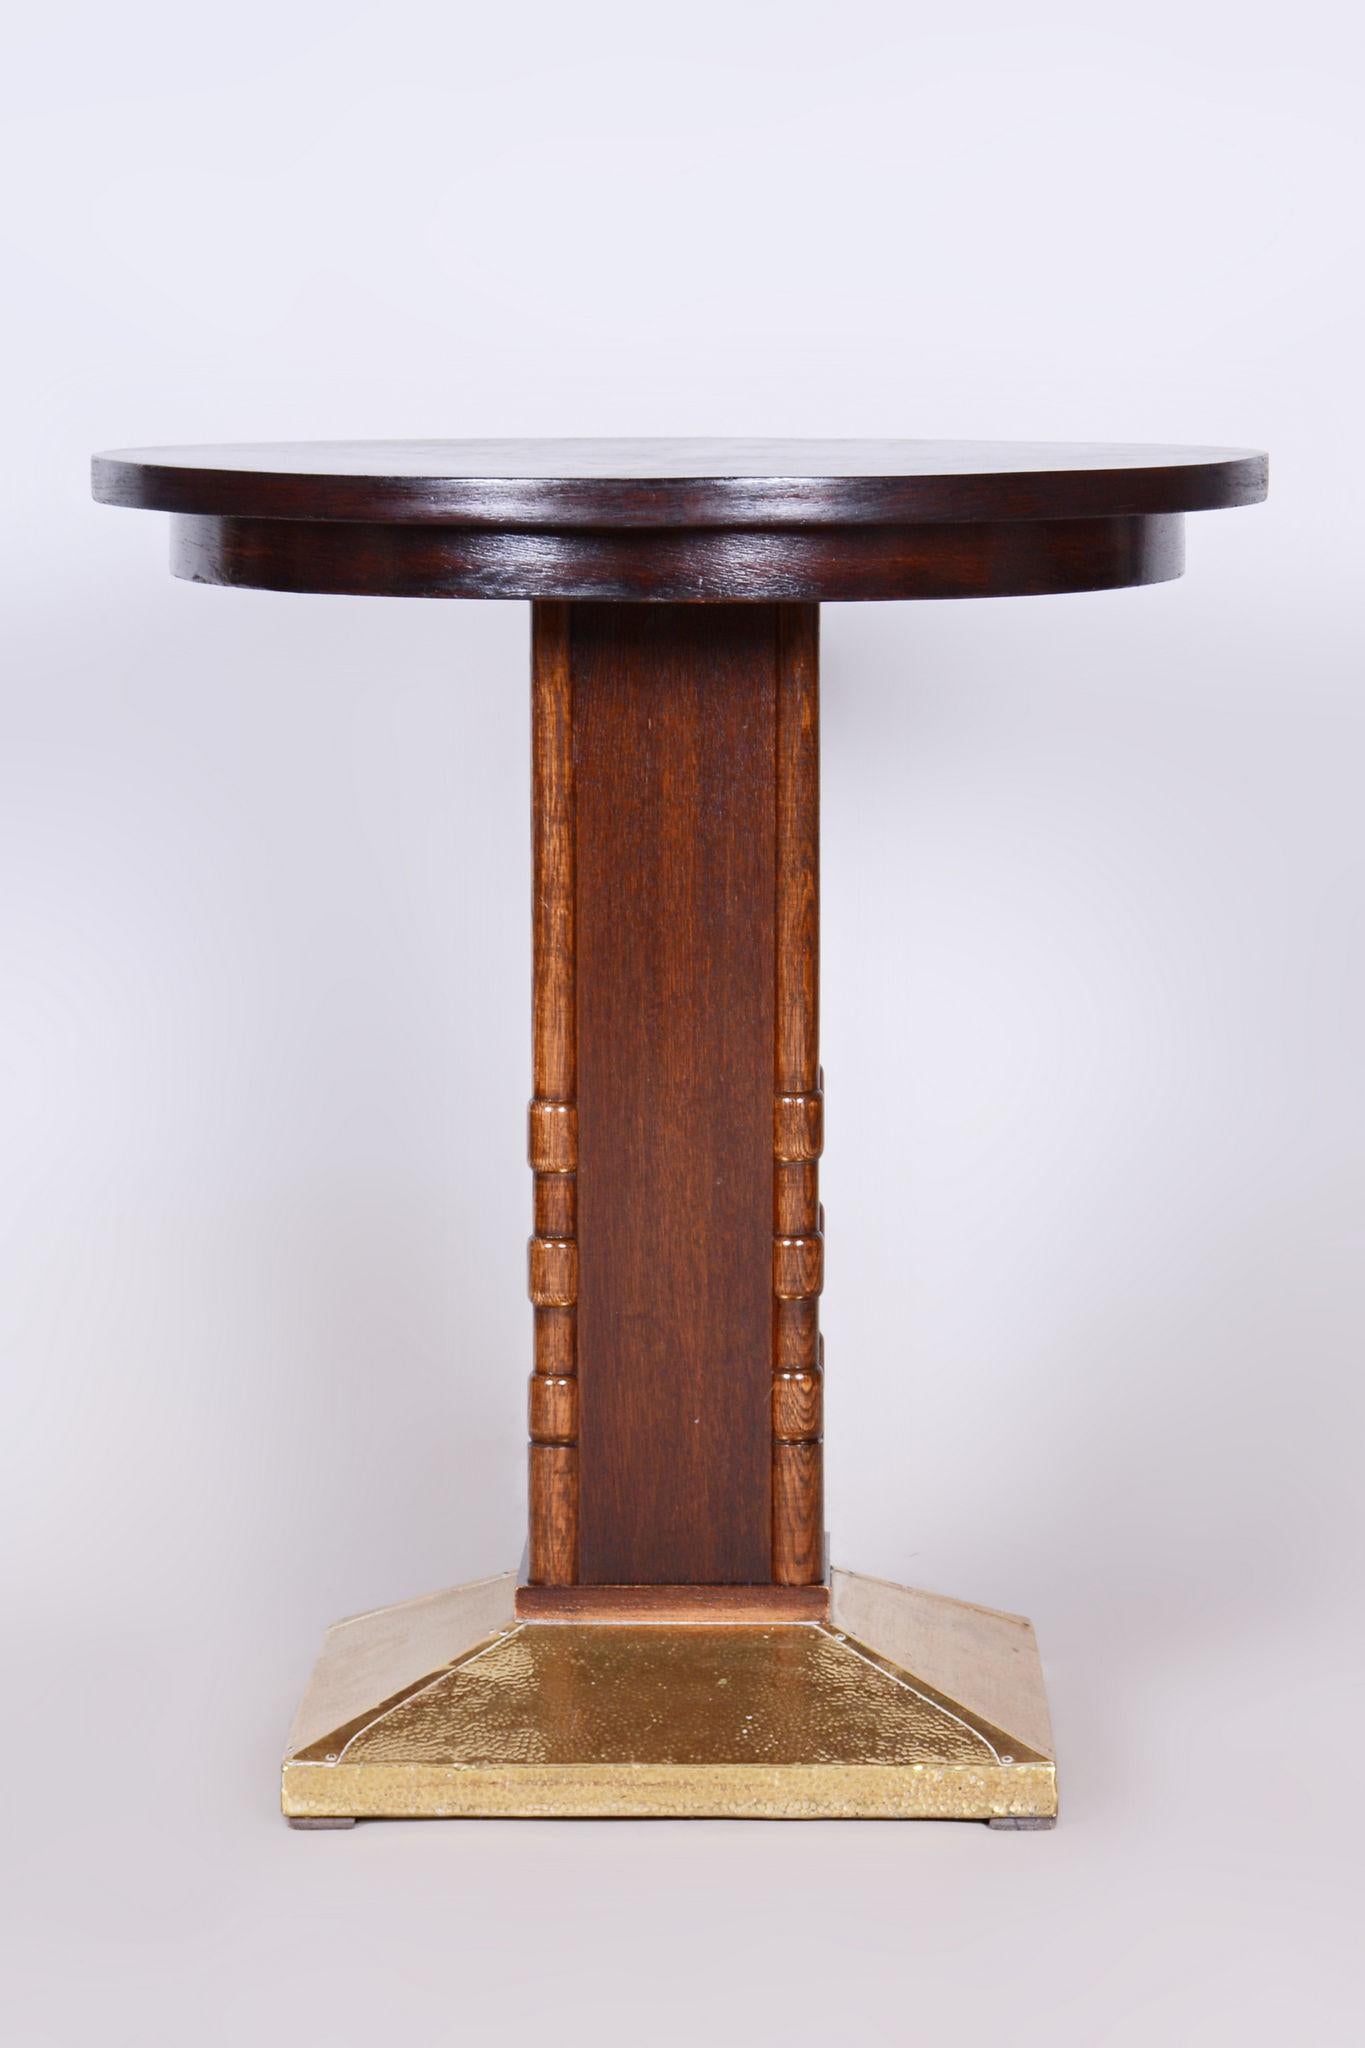 Restored Art Deco Small Table, Oak, Brass, Revived Polish, Czechia, 1920s In Good Condition For Sale In Horomerice, CZ